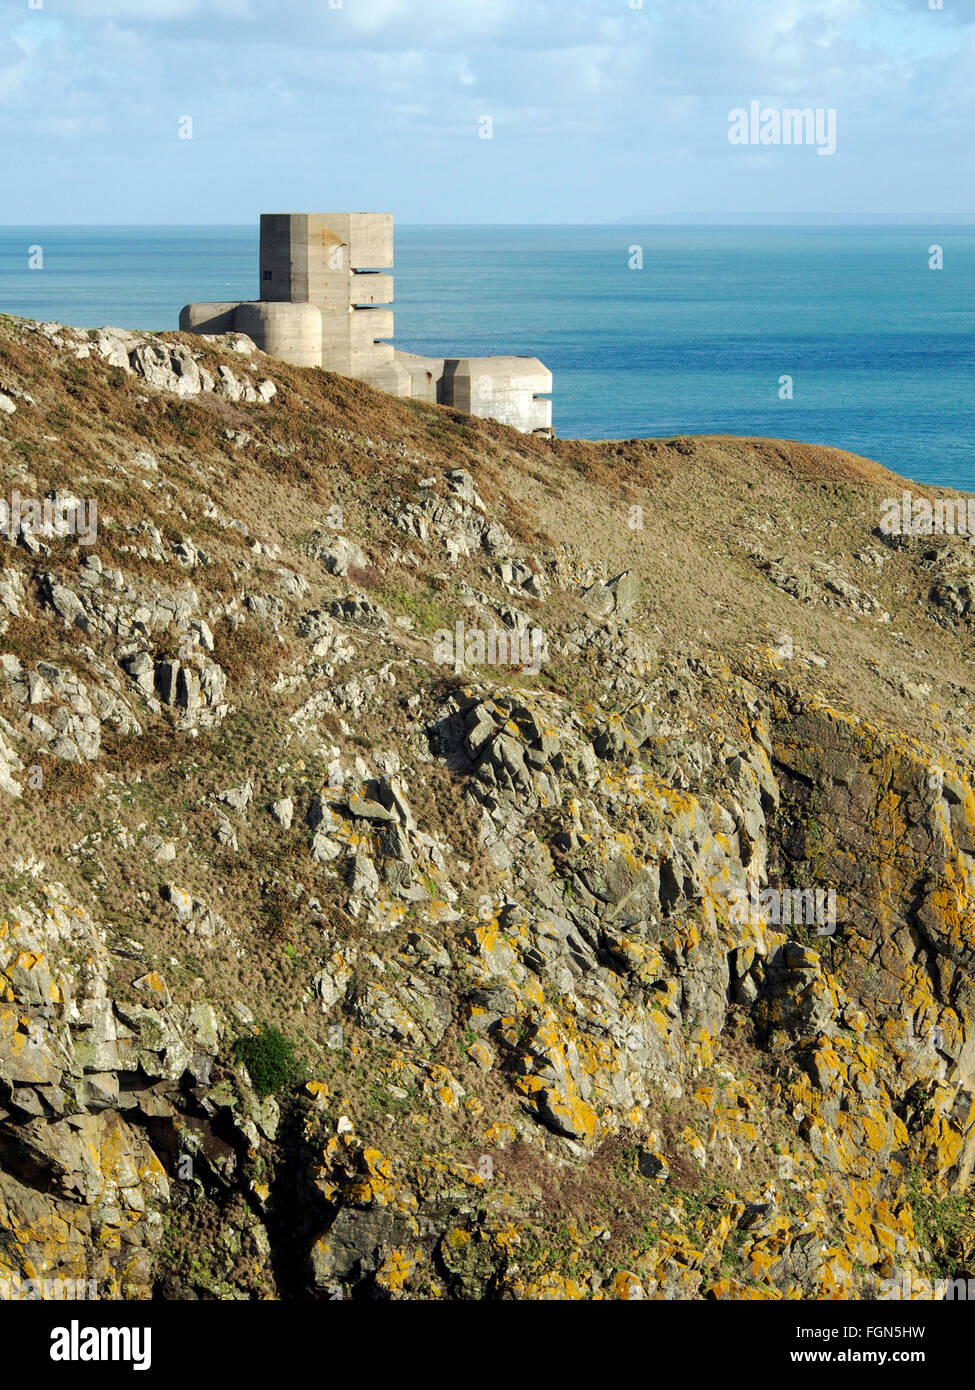 Steep cliffs and WW2 German bunker and observation tower MP4, a relic of occupation, Pleimnont Point, Guernsey, Channel Islands. Stock Photo